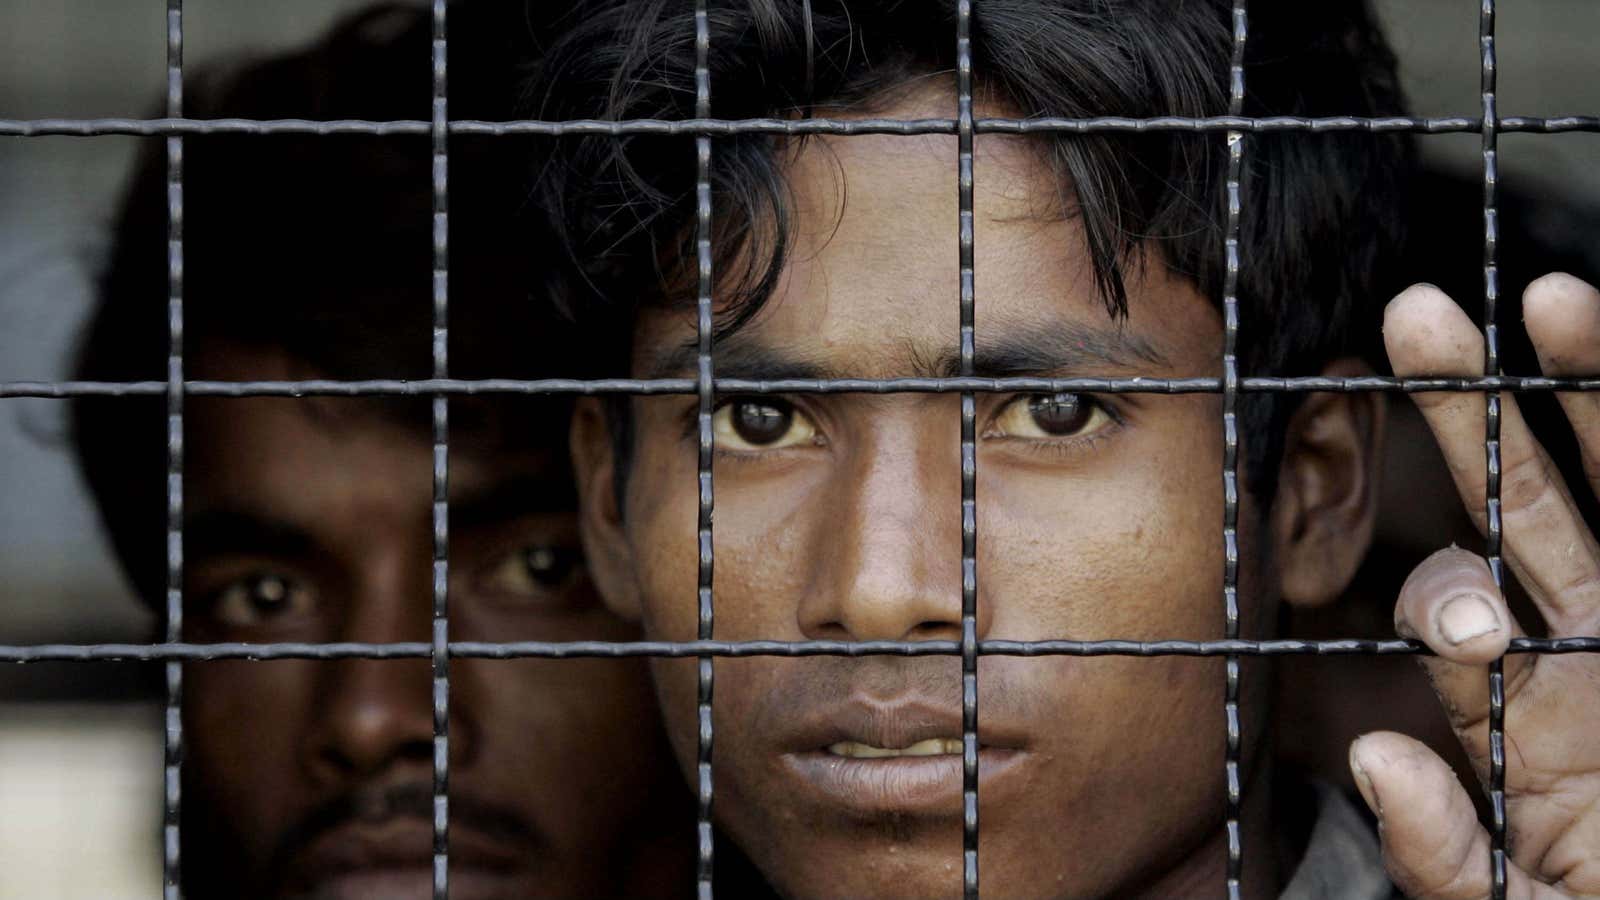 Rohingya migrants look out from the window of a Thai police van in 2009.